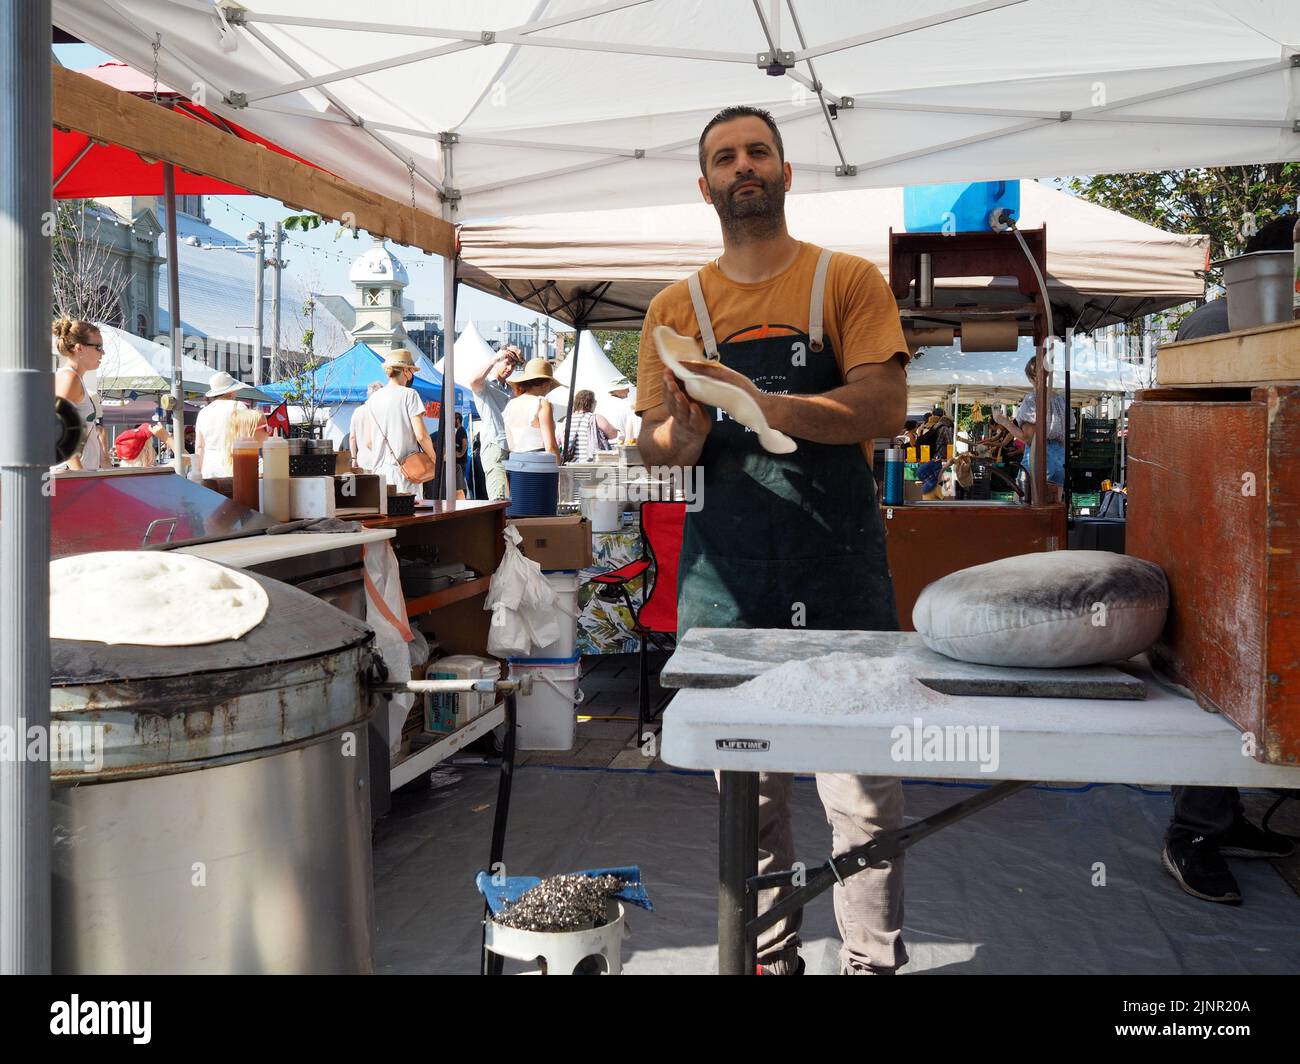 Scenes from the Farmer's Market at Lansdowne Place. Falafel Guys tossing pita dough. Ottawa, ON, Canada. Stock Photo